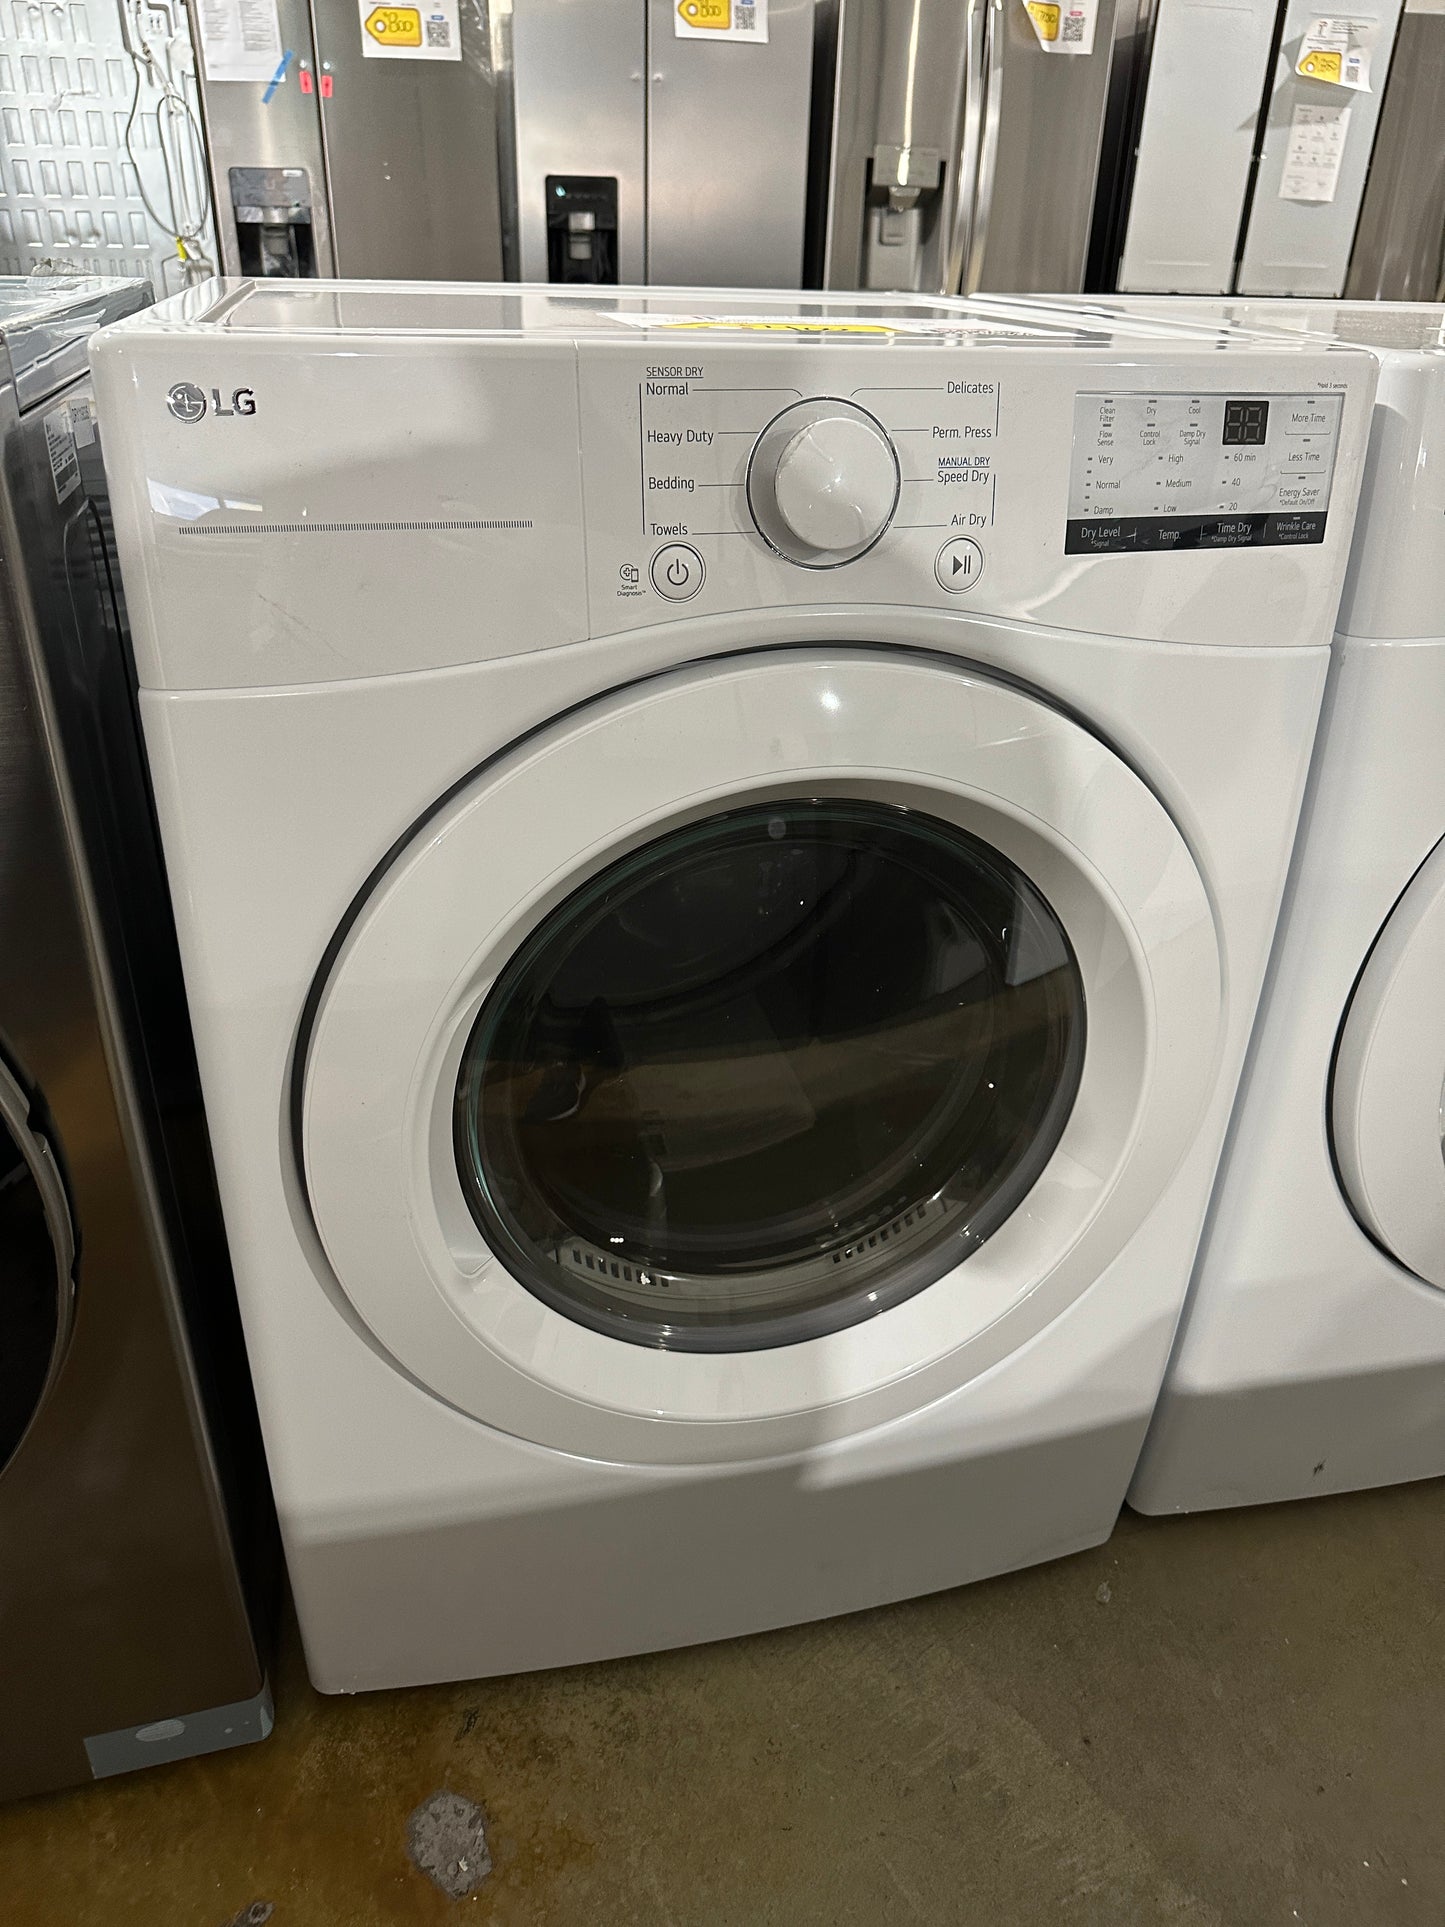 GREAT NEW WHITE STACKABLE ELECTRIC DRYER MODEL: DLE3400W  DRY11932S